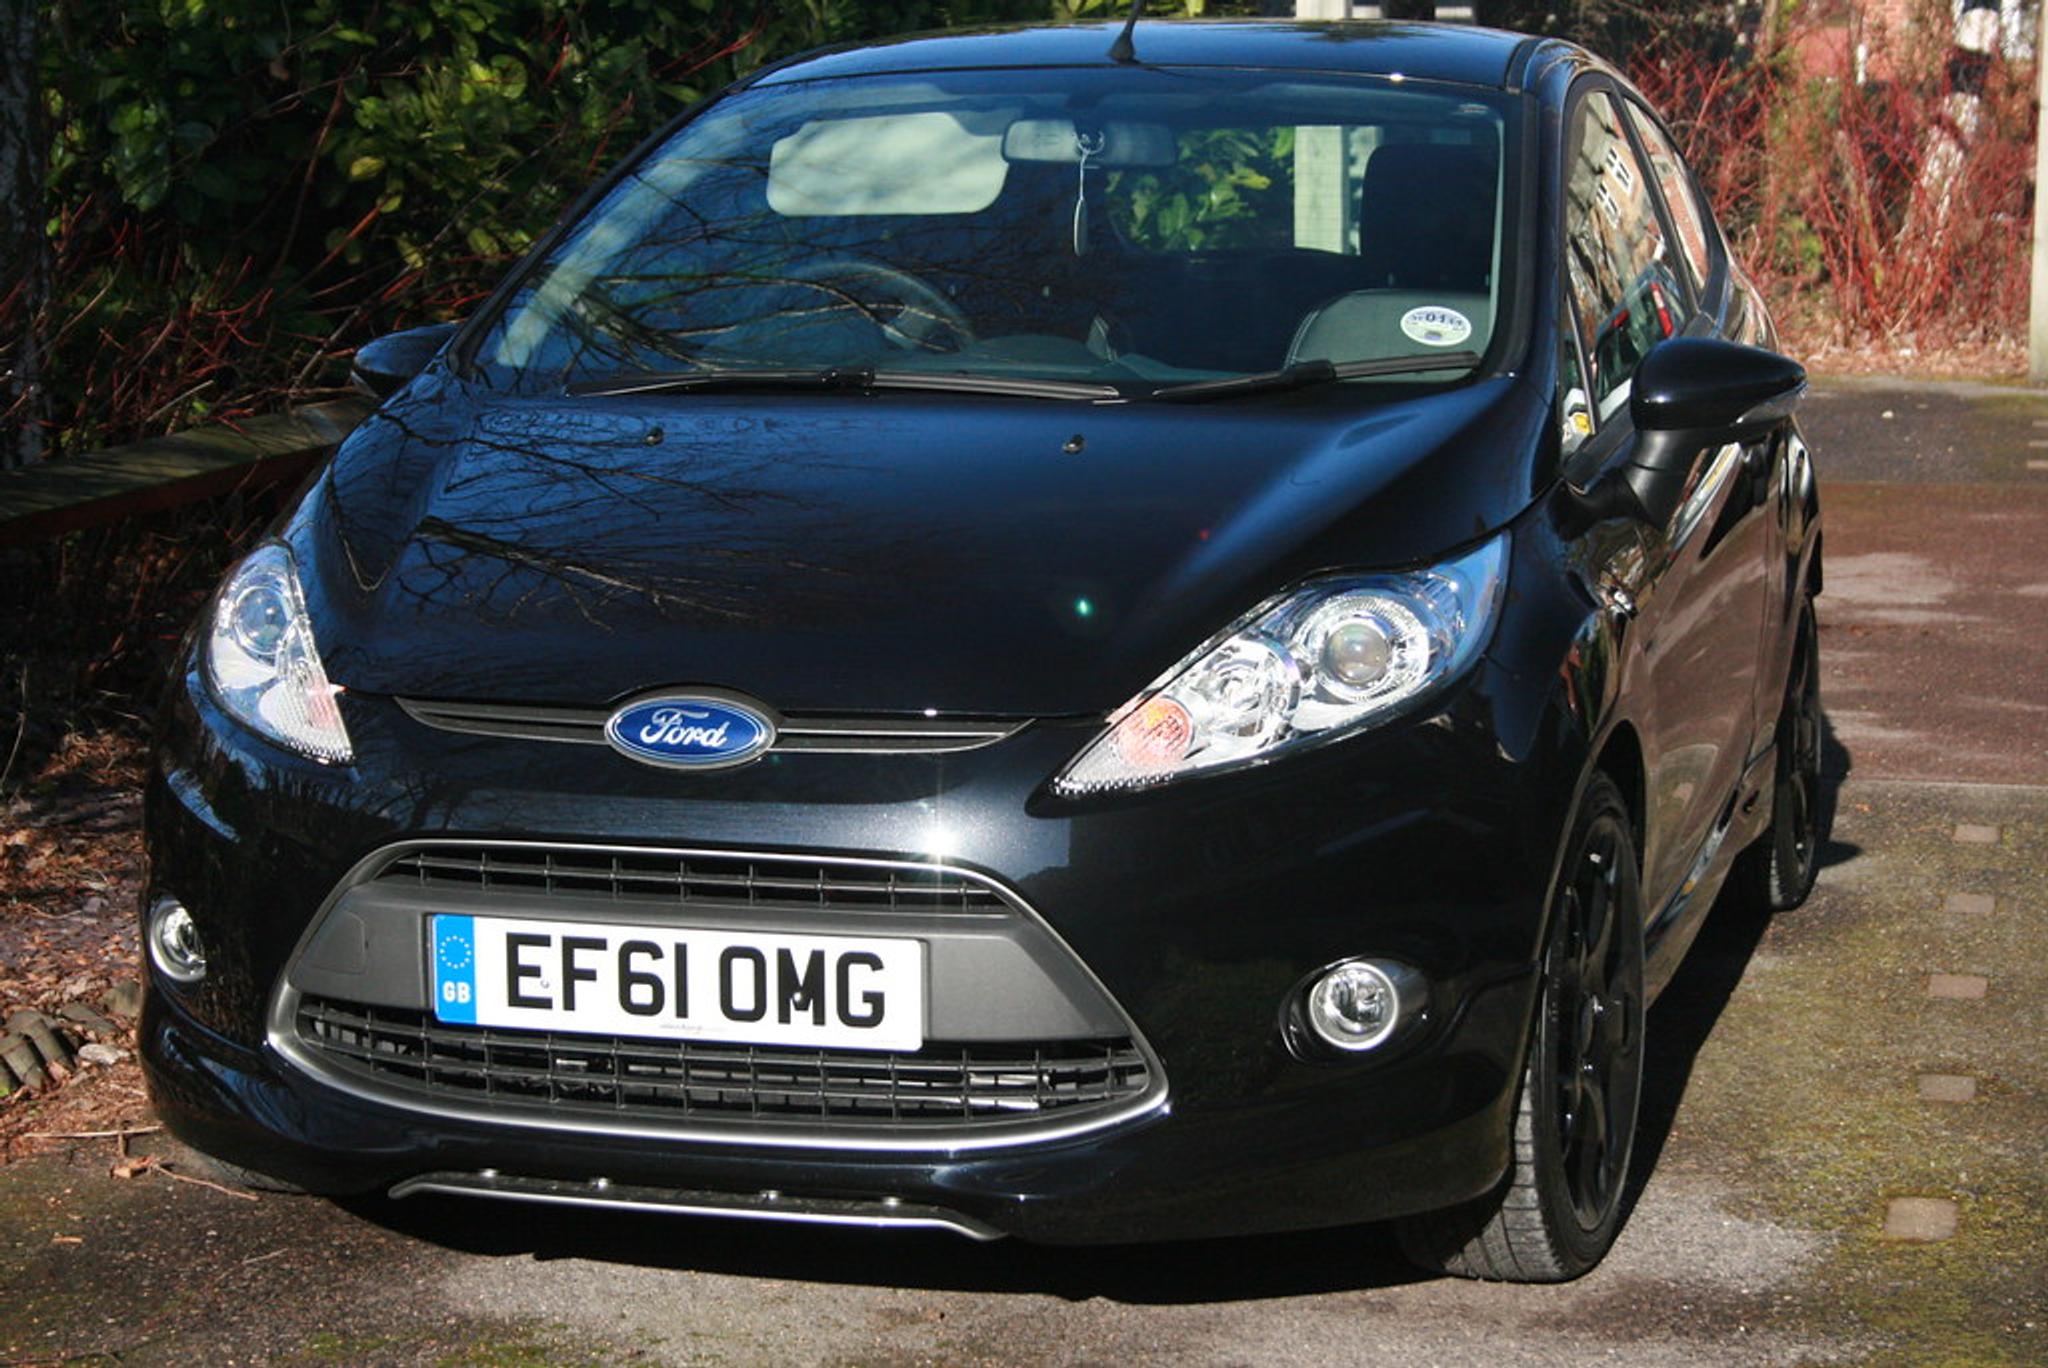 Black Ford Fiesta front